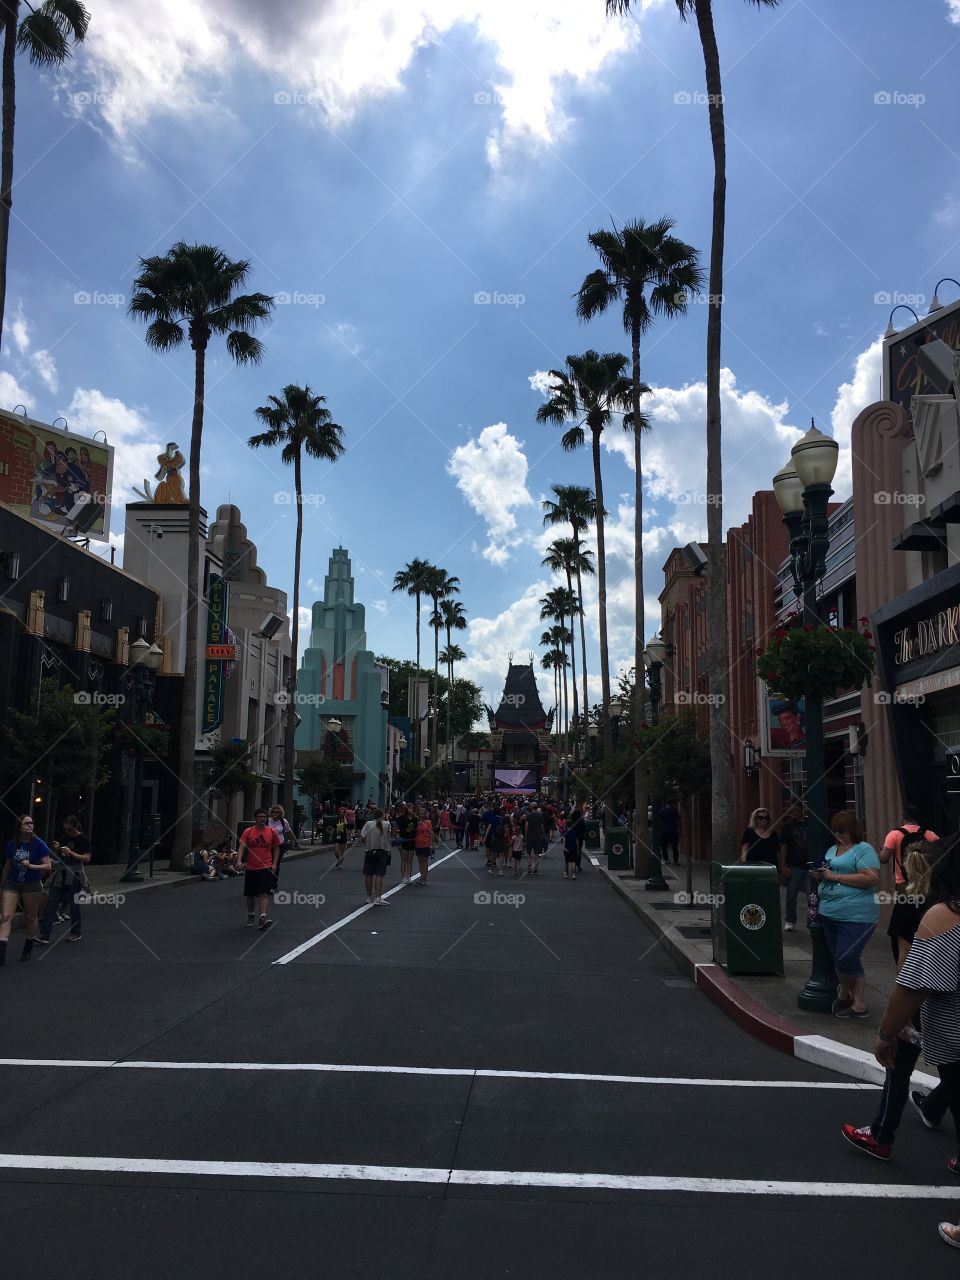 Roaming the streets of Disney Land 